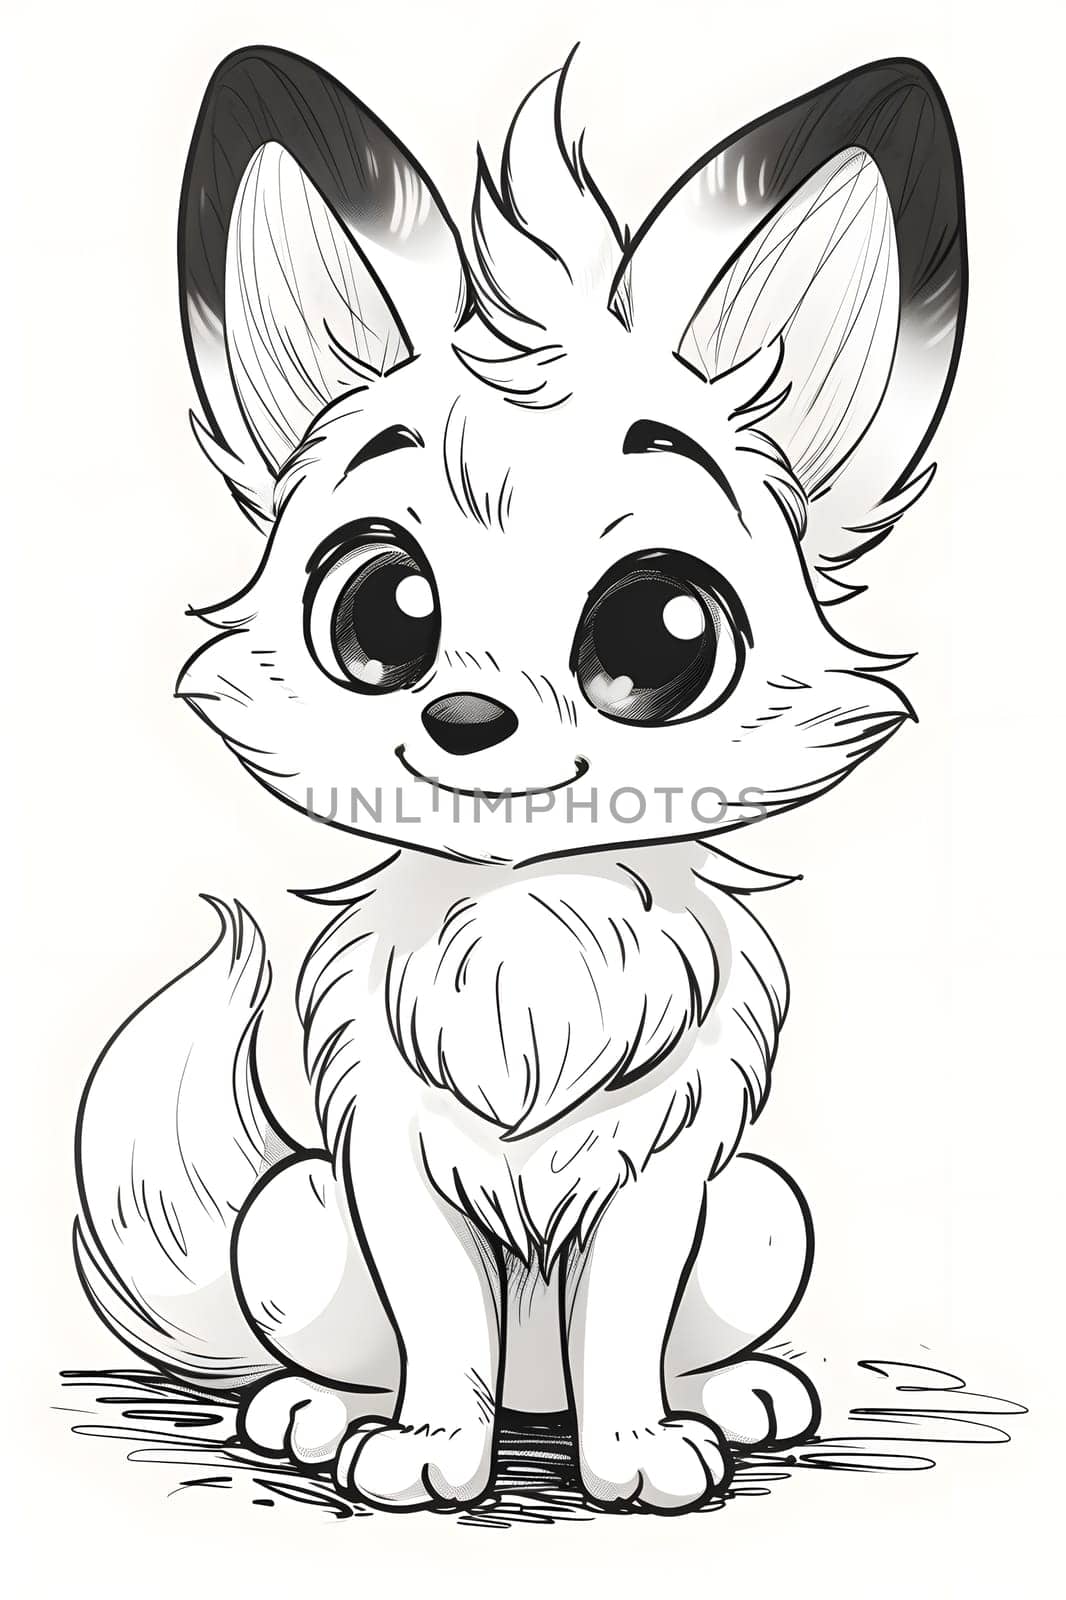 A black and white cartoon drawing of a happy fox sitting down, with a cute gesture and whiskers. The foxs eye, jaw, ear, and vertebrate are detailed in the art